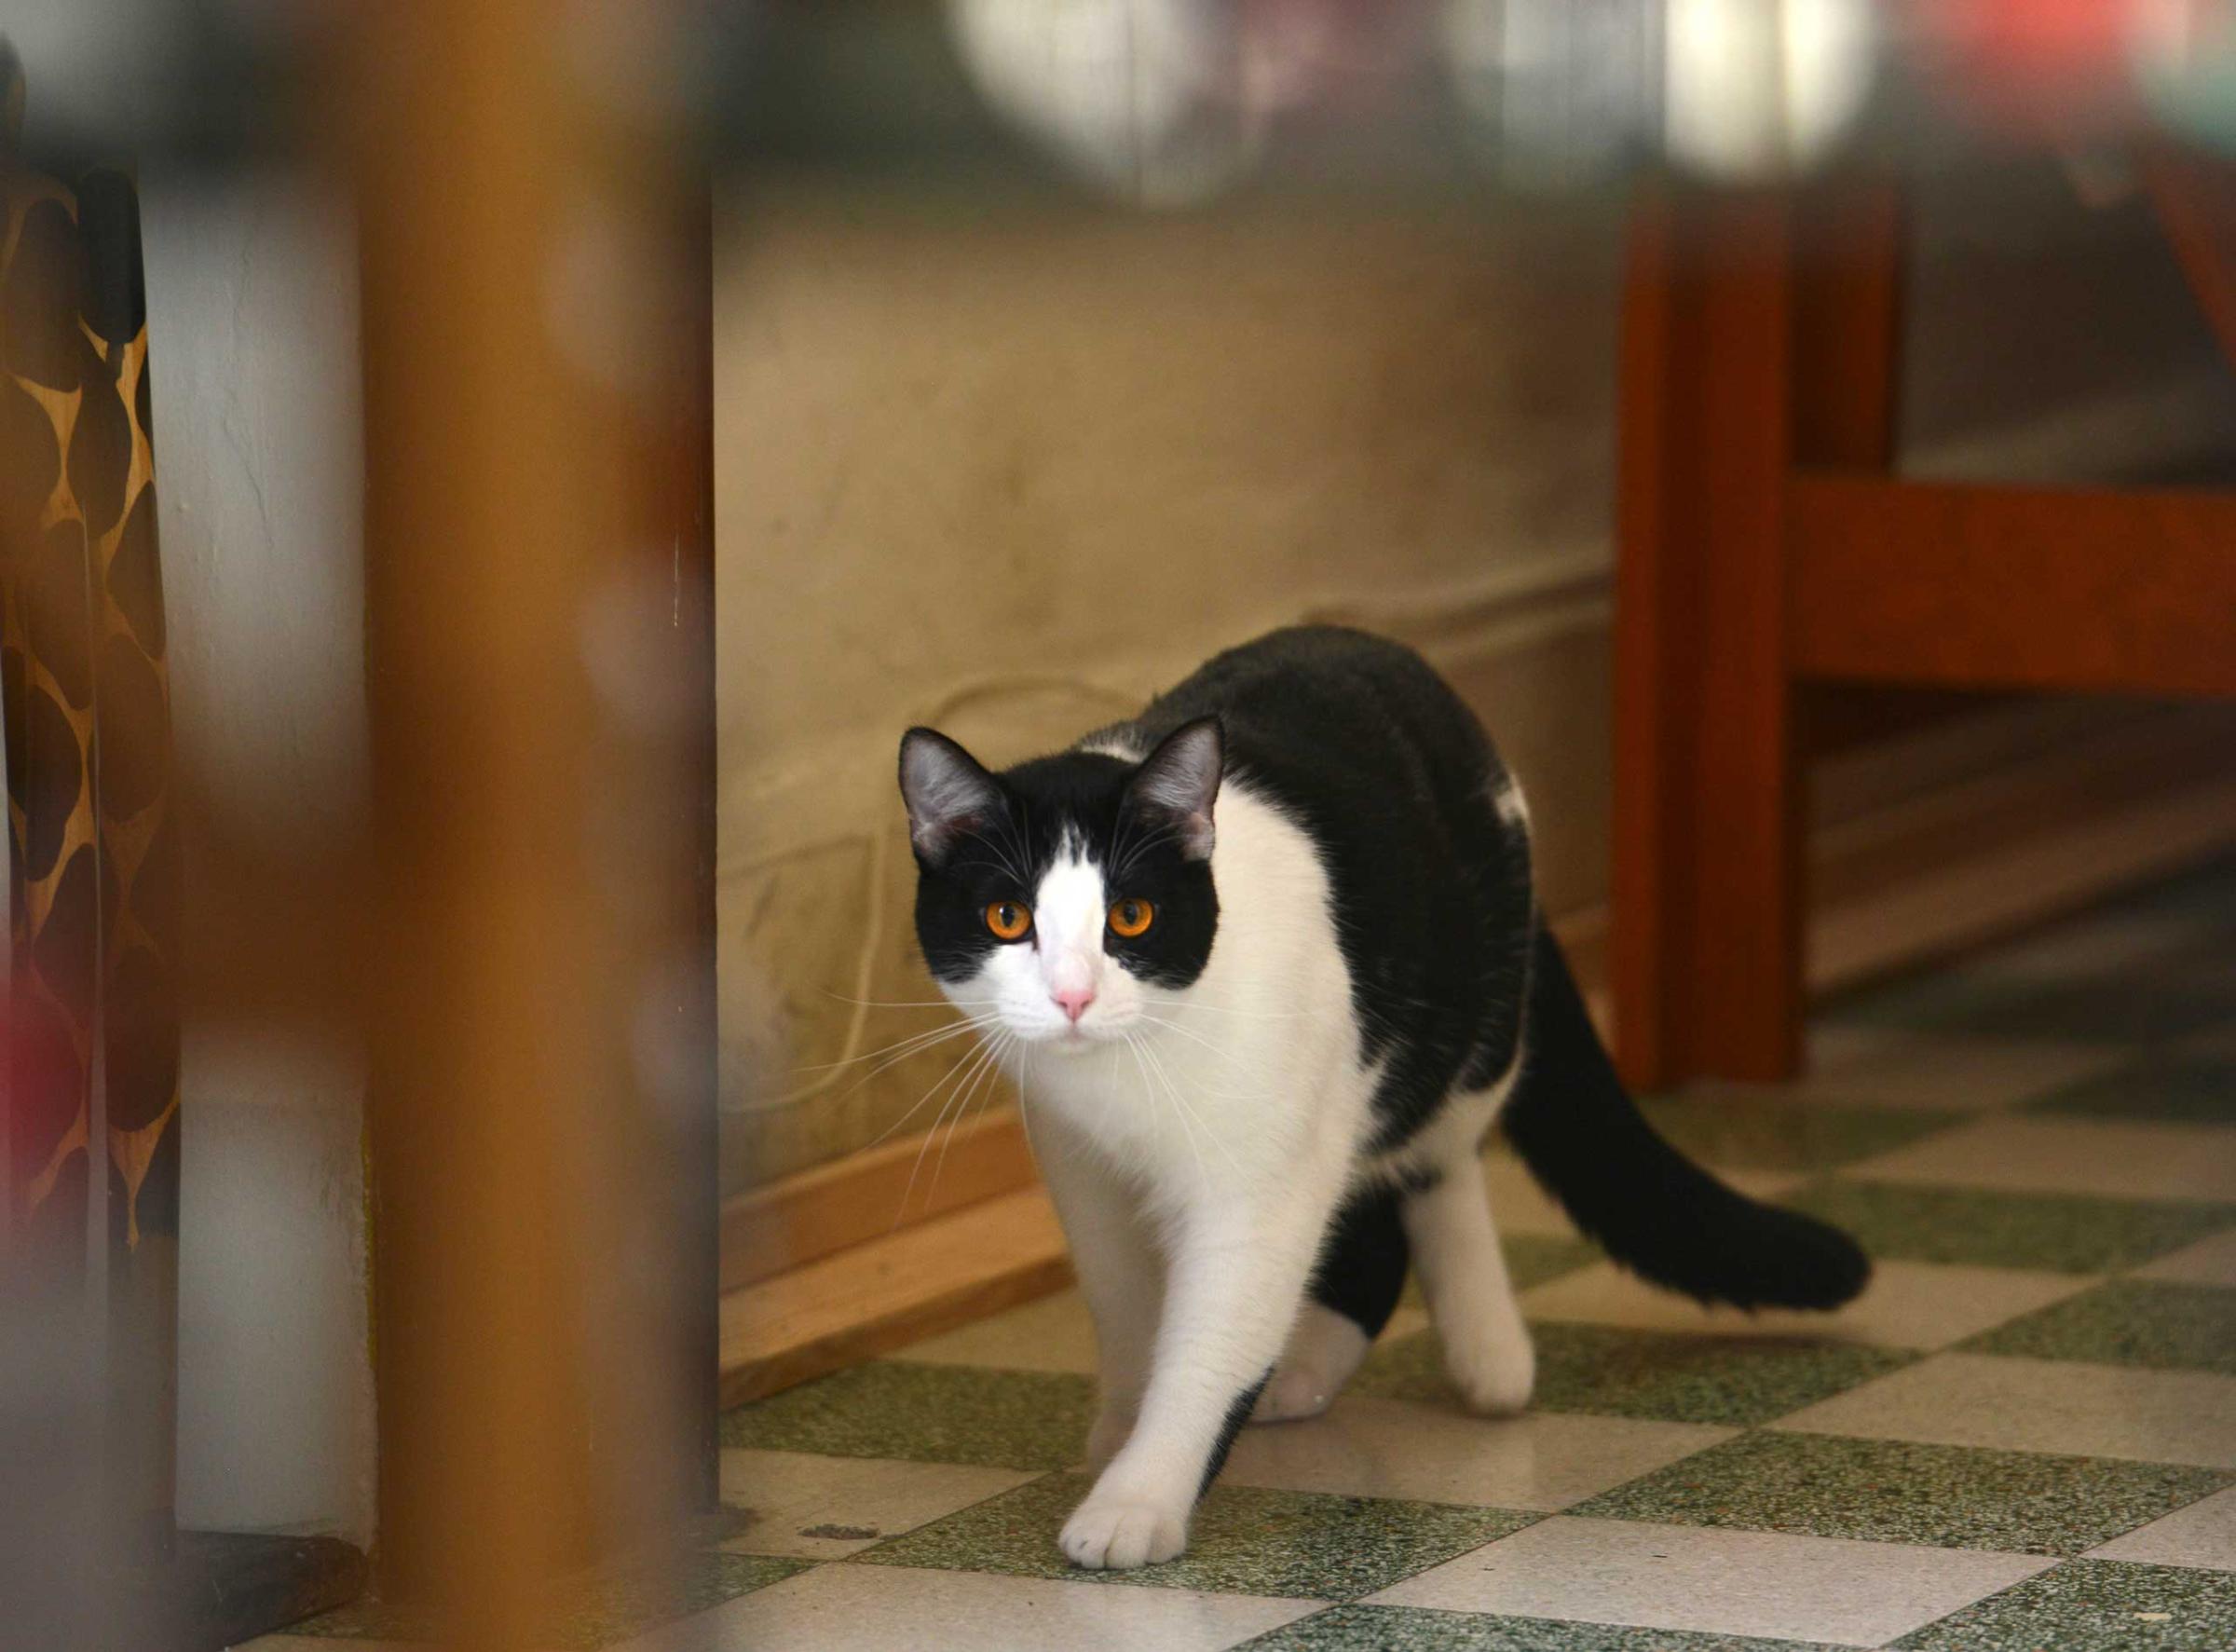 Mayoral candidate Morris the Cat is seen at his home in Xalapa